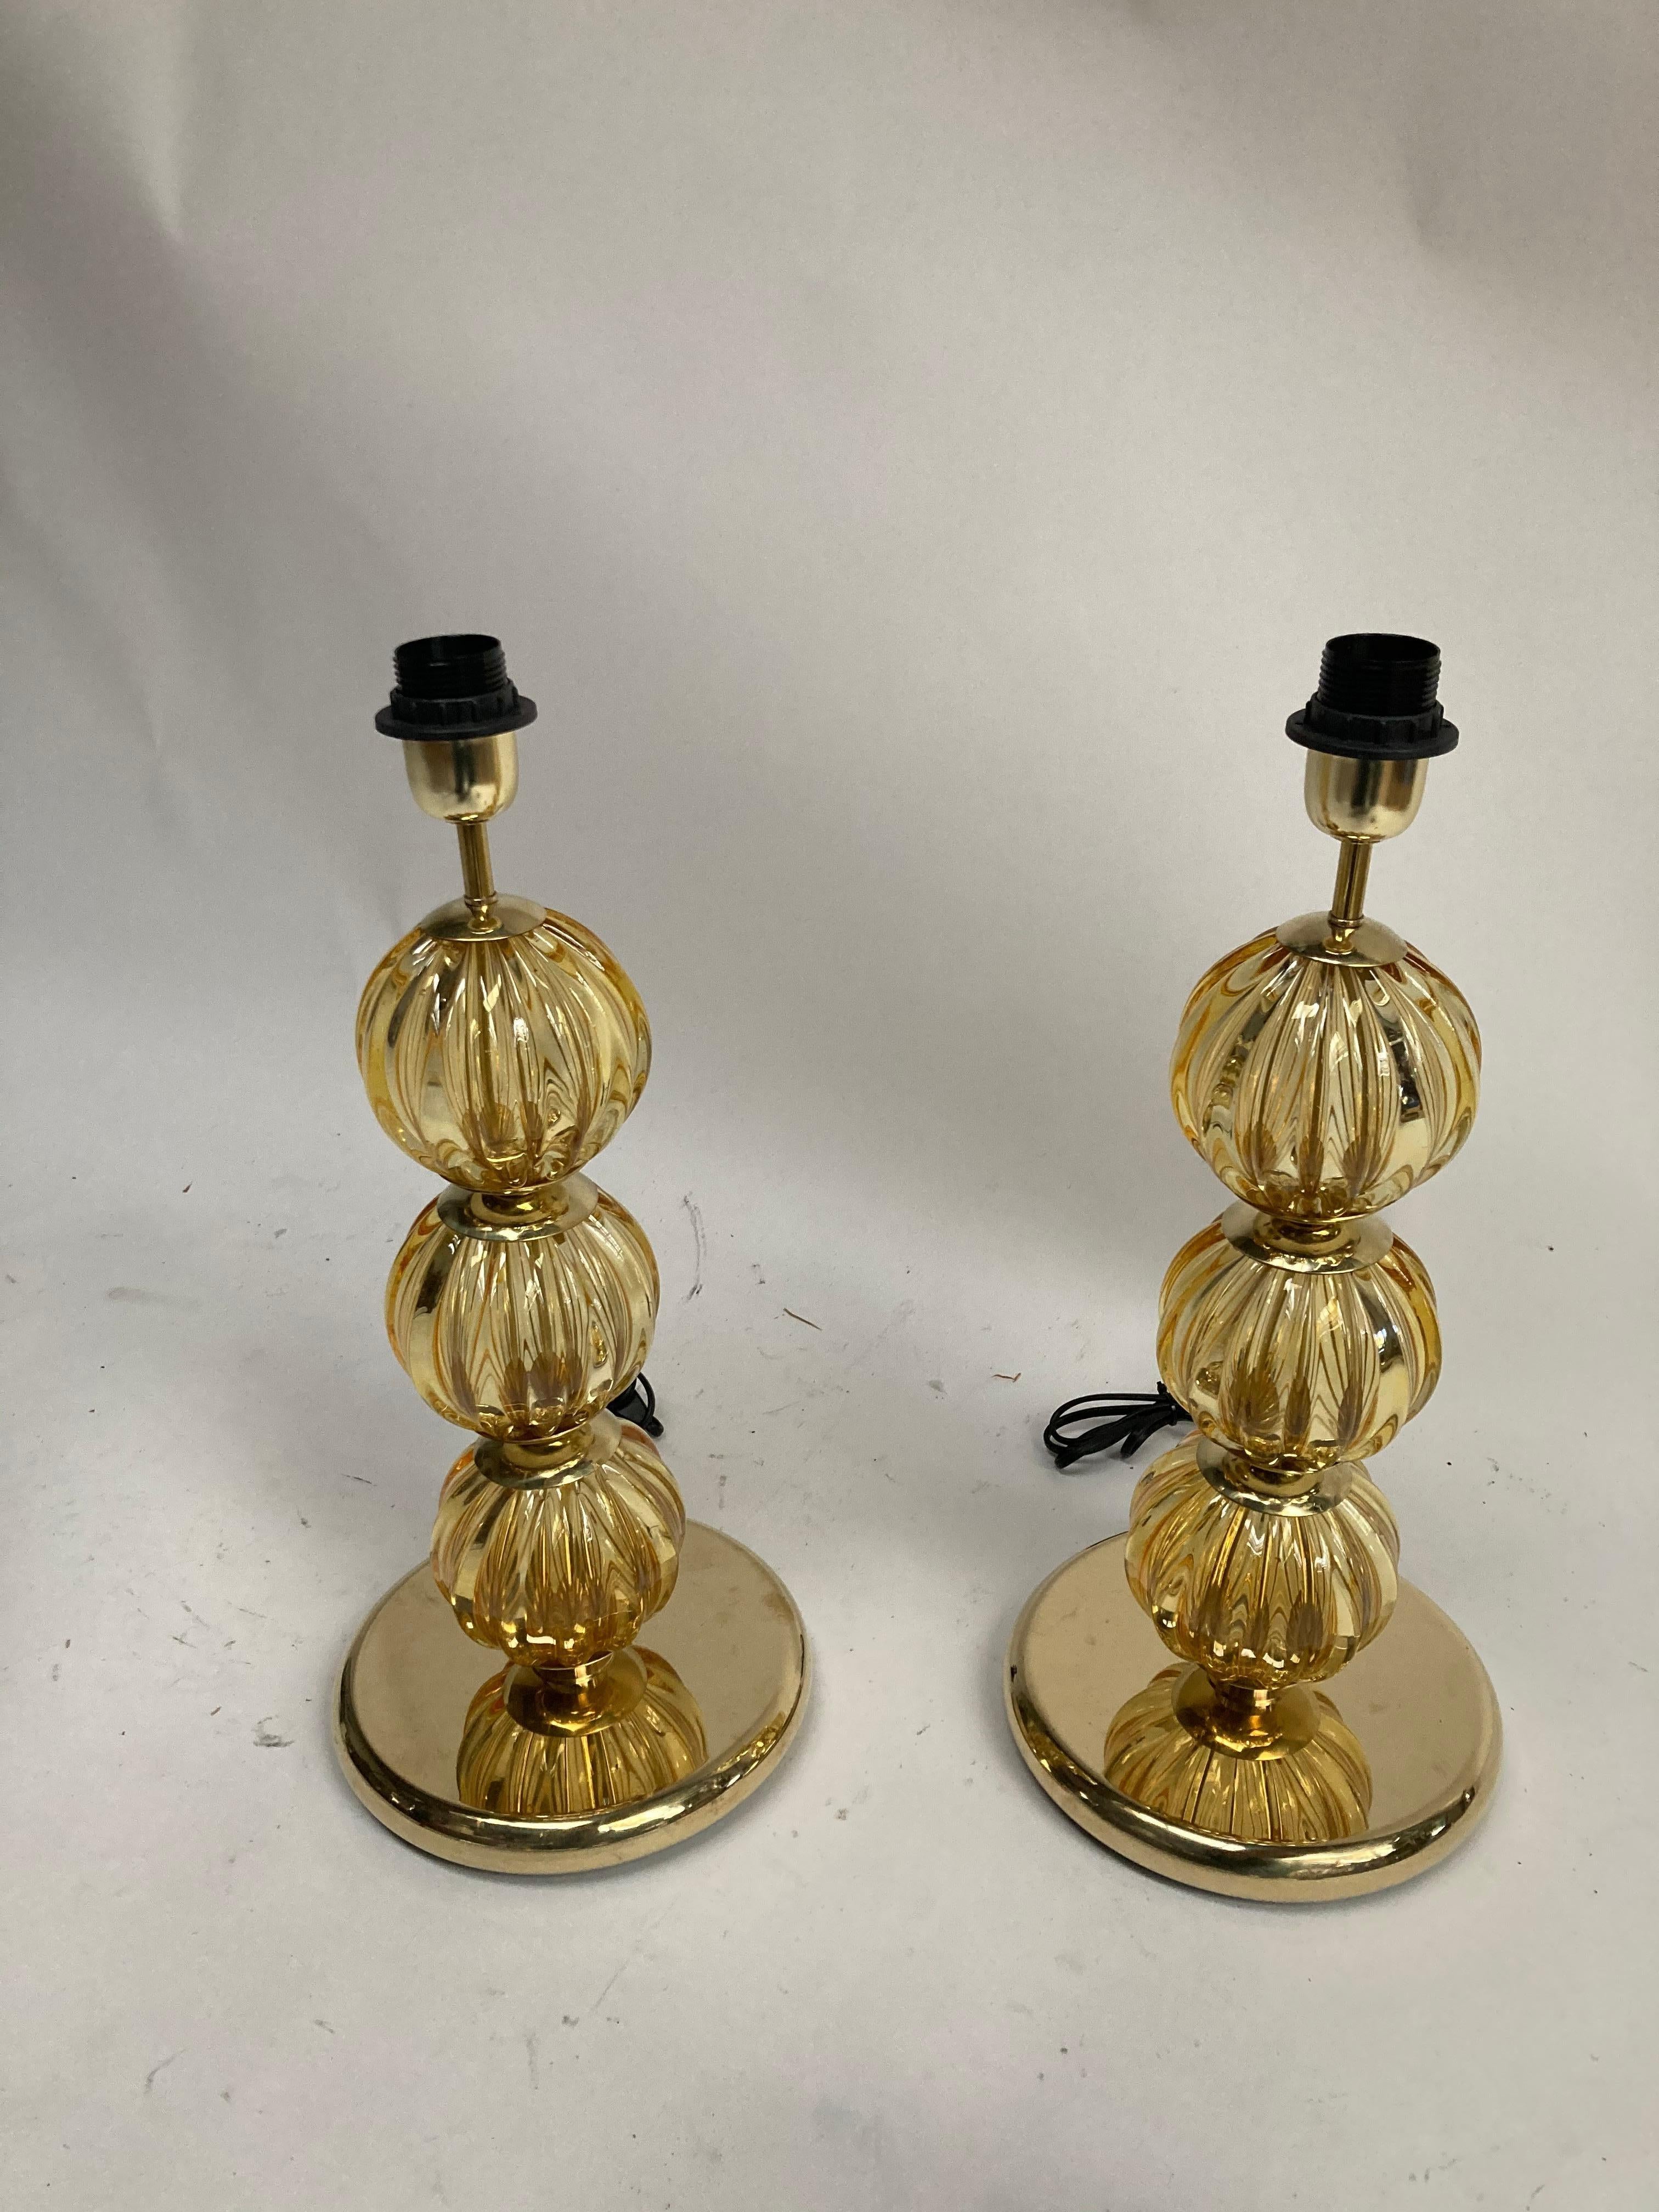 Pair of Murano glass lamps with polished brass base
Italy
1970's
Dimensions given without shade
No shade provided.